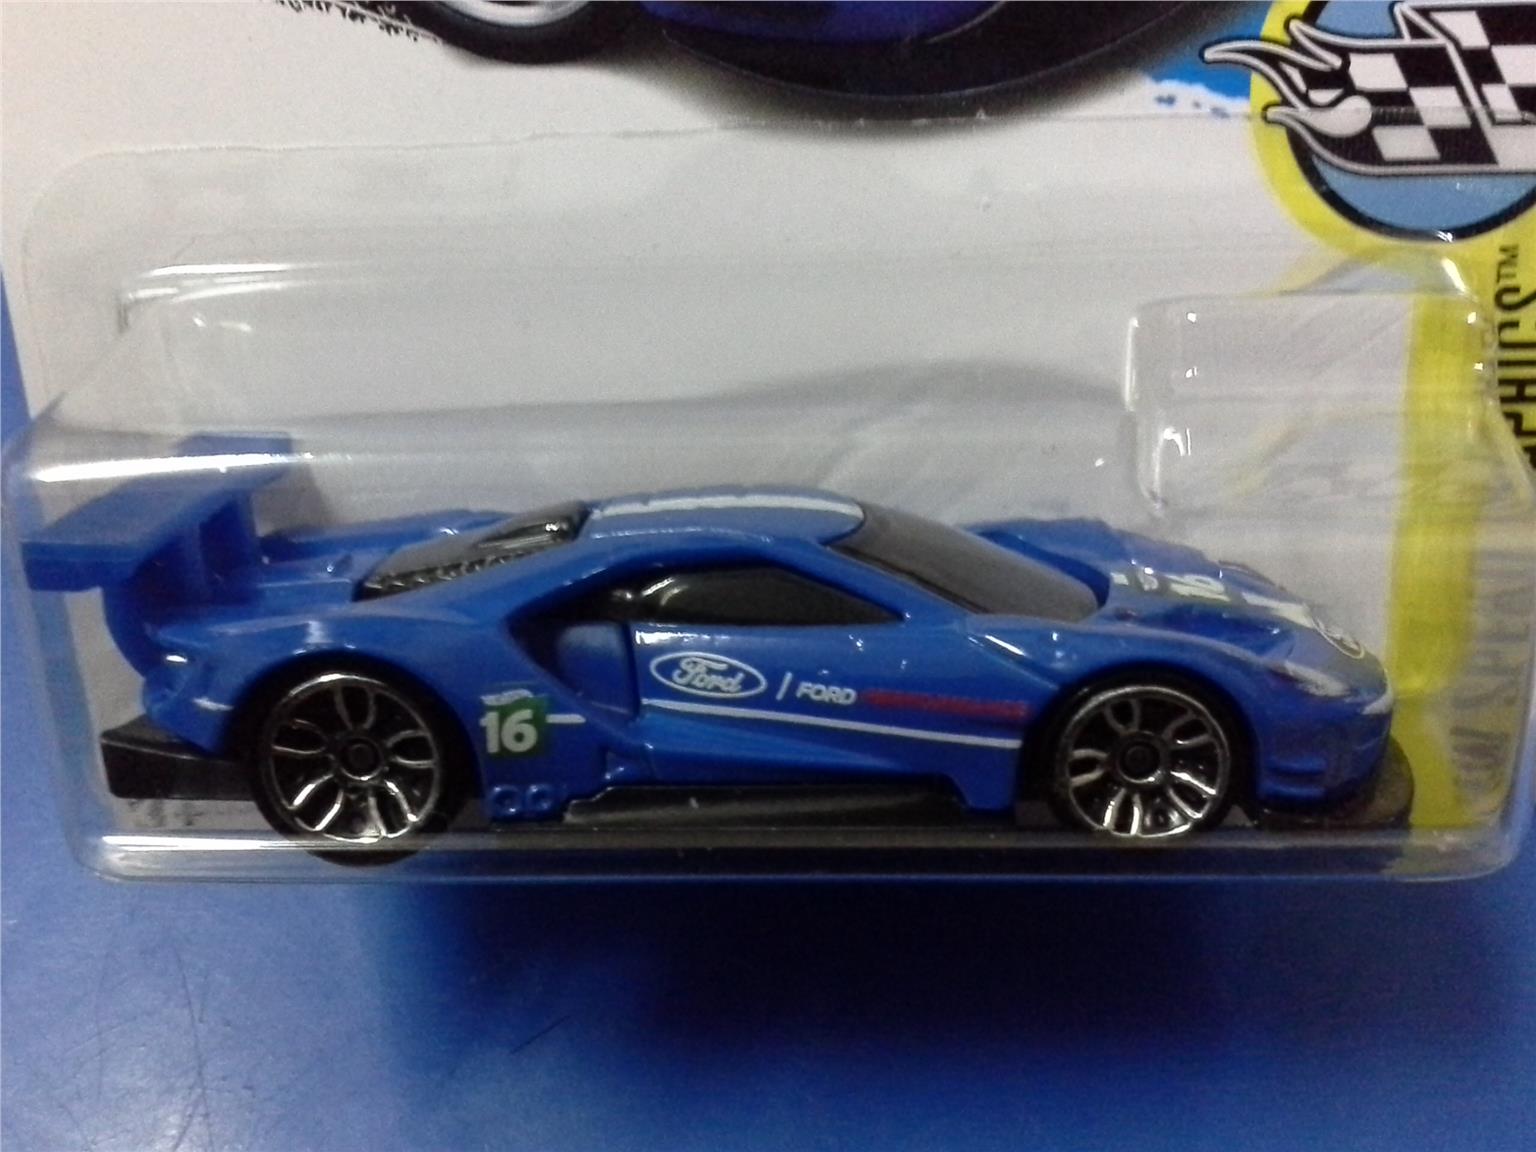 hot wheels ford gt 2017